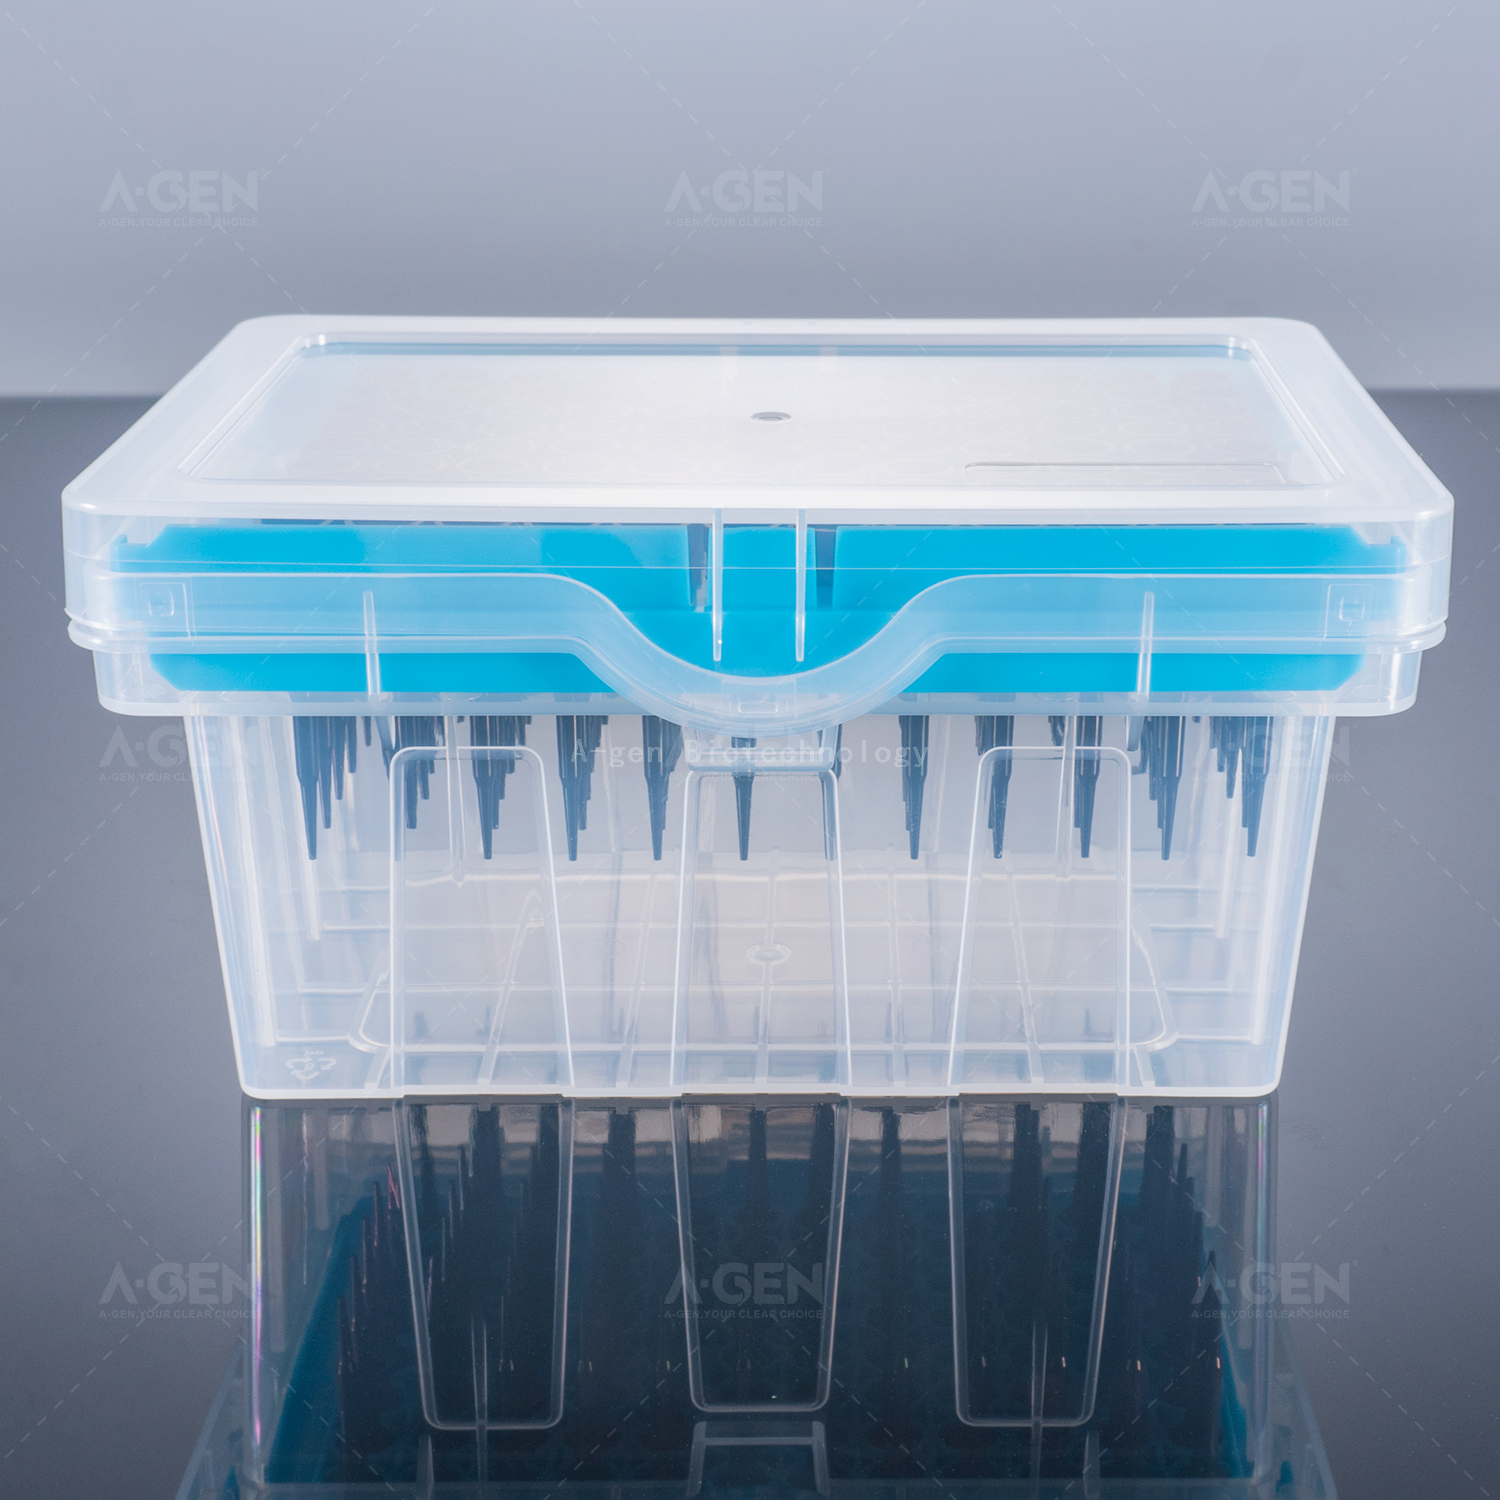 Tecan LiHa 20μL Conductive PP Pipette Tip (Racked,sterilized) for Liquid Transfer With Filter TTF-20-RSL Low Residual